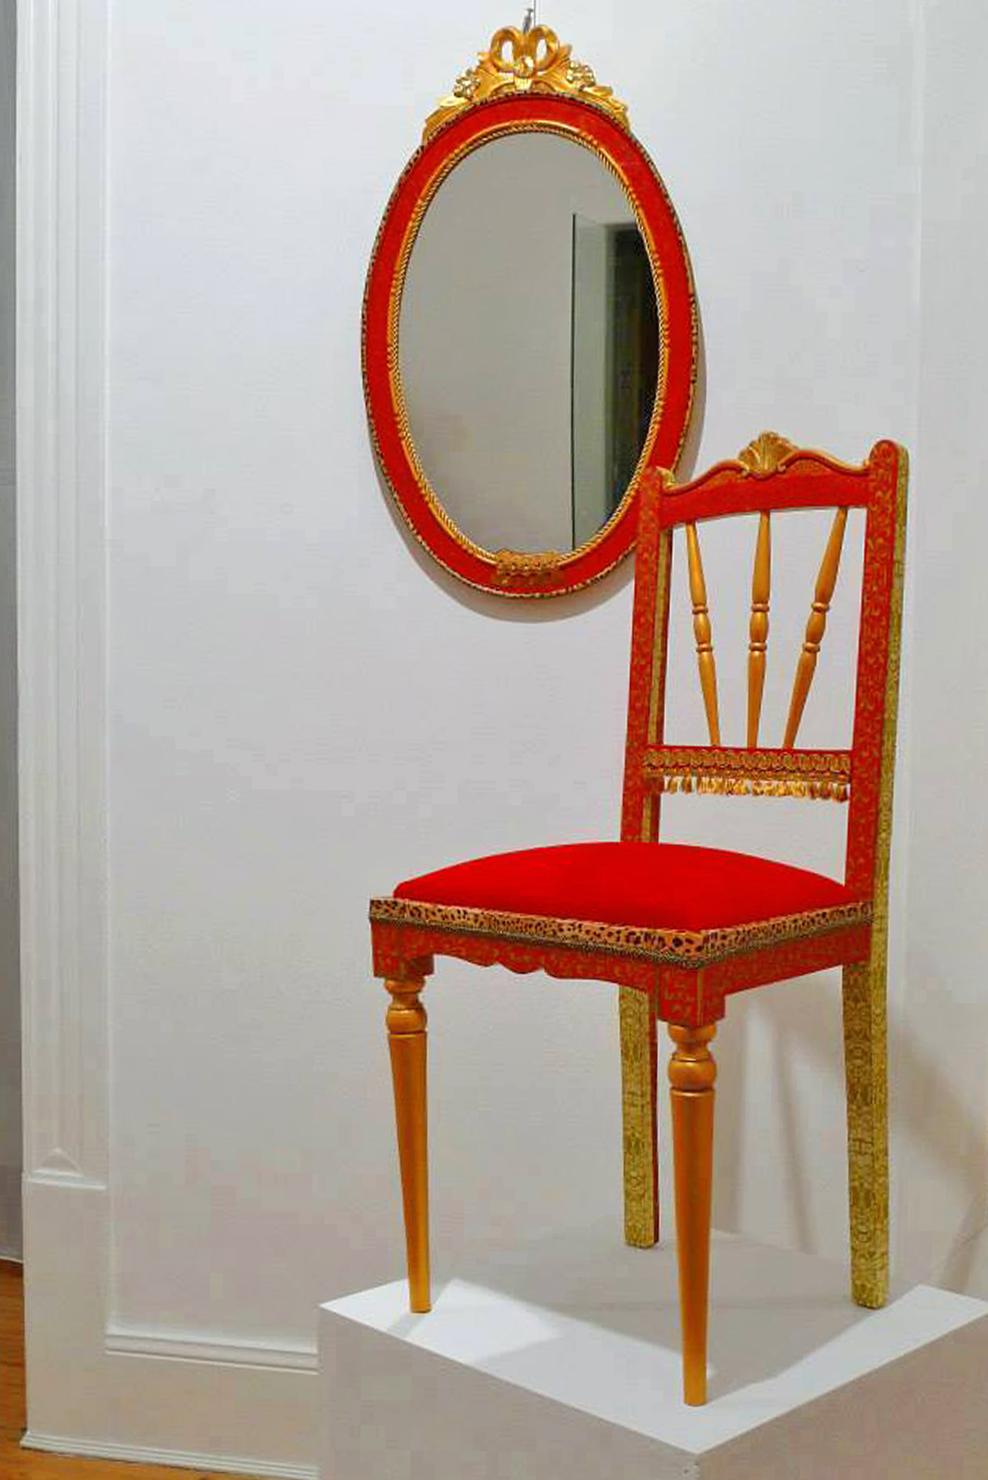 Material: Wood; Mixed-media: Decoupage and application in gold leaf and paper.
Artists: Ana Maria Cortesão / Micca Hellers
Private collection.
Measures:
Chair: 36 cm, 36 cm, 90 cm
Mirror: 90 cm, 45 cm.